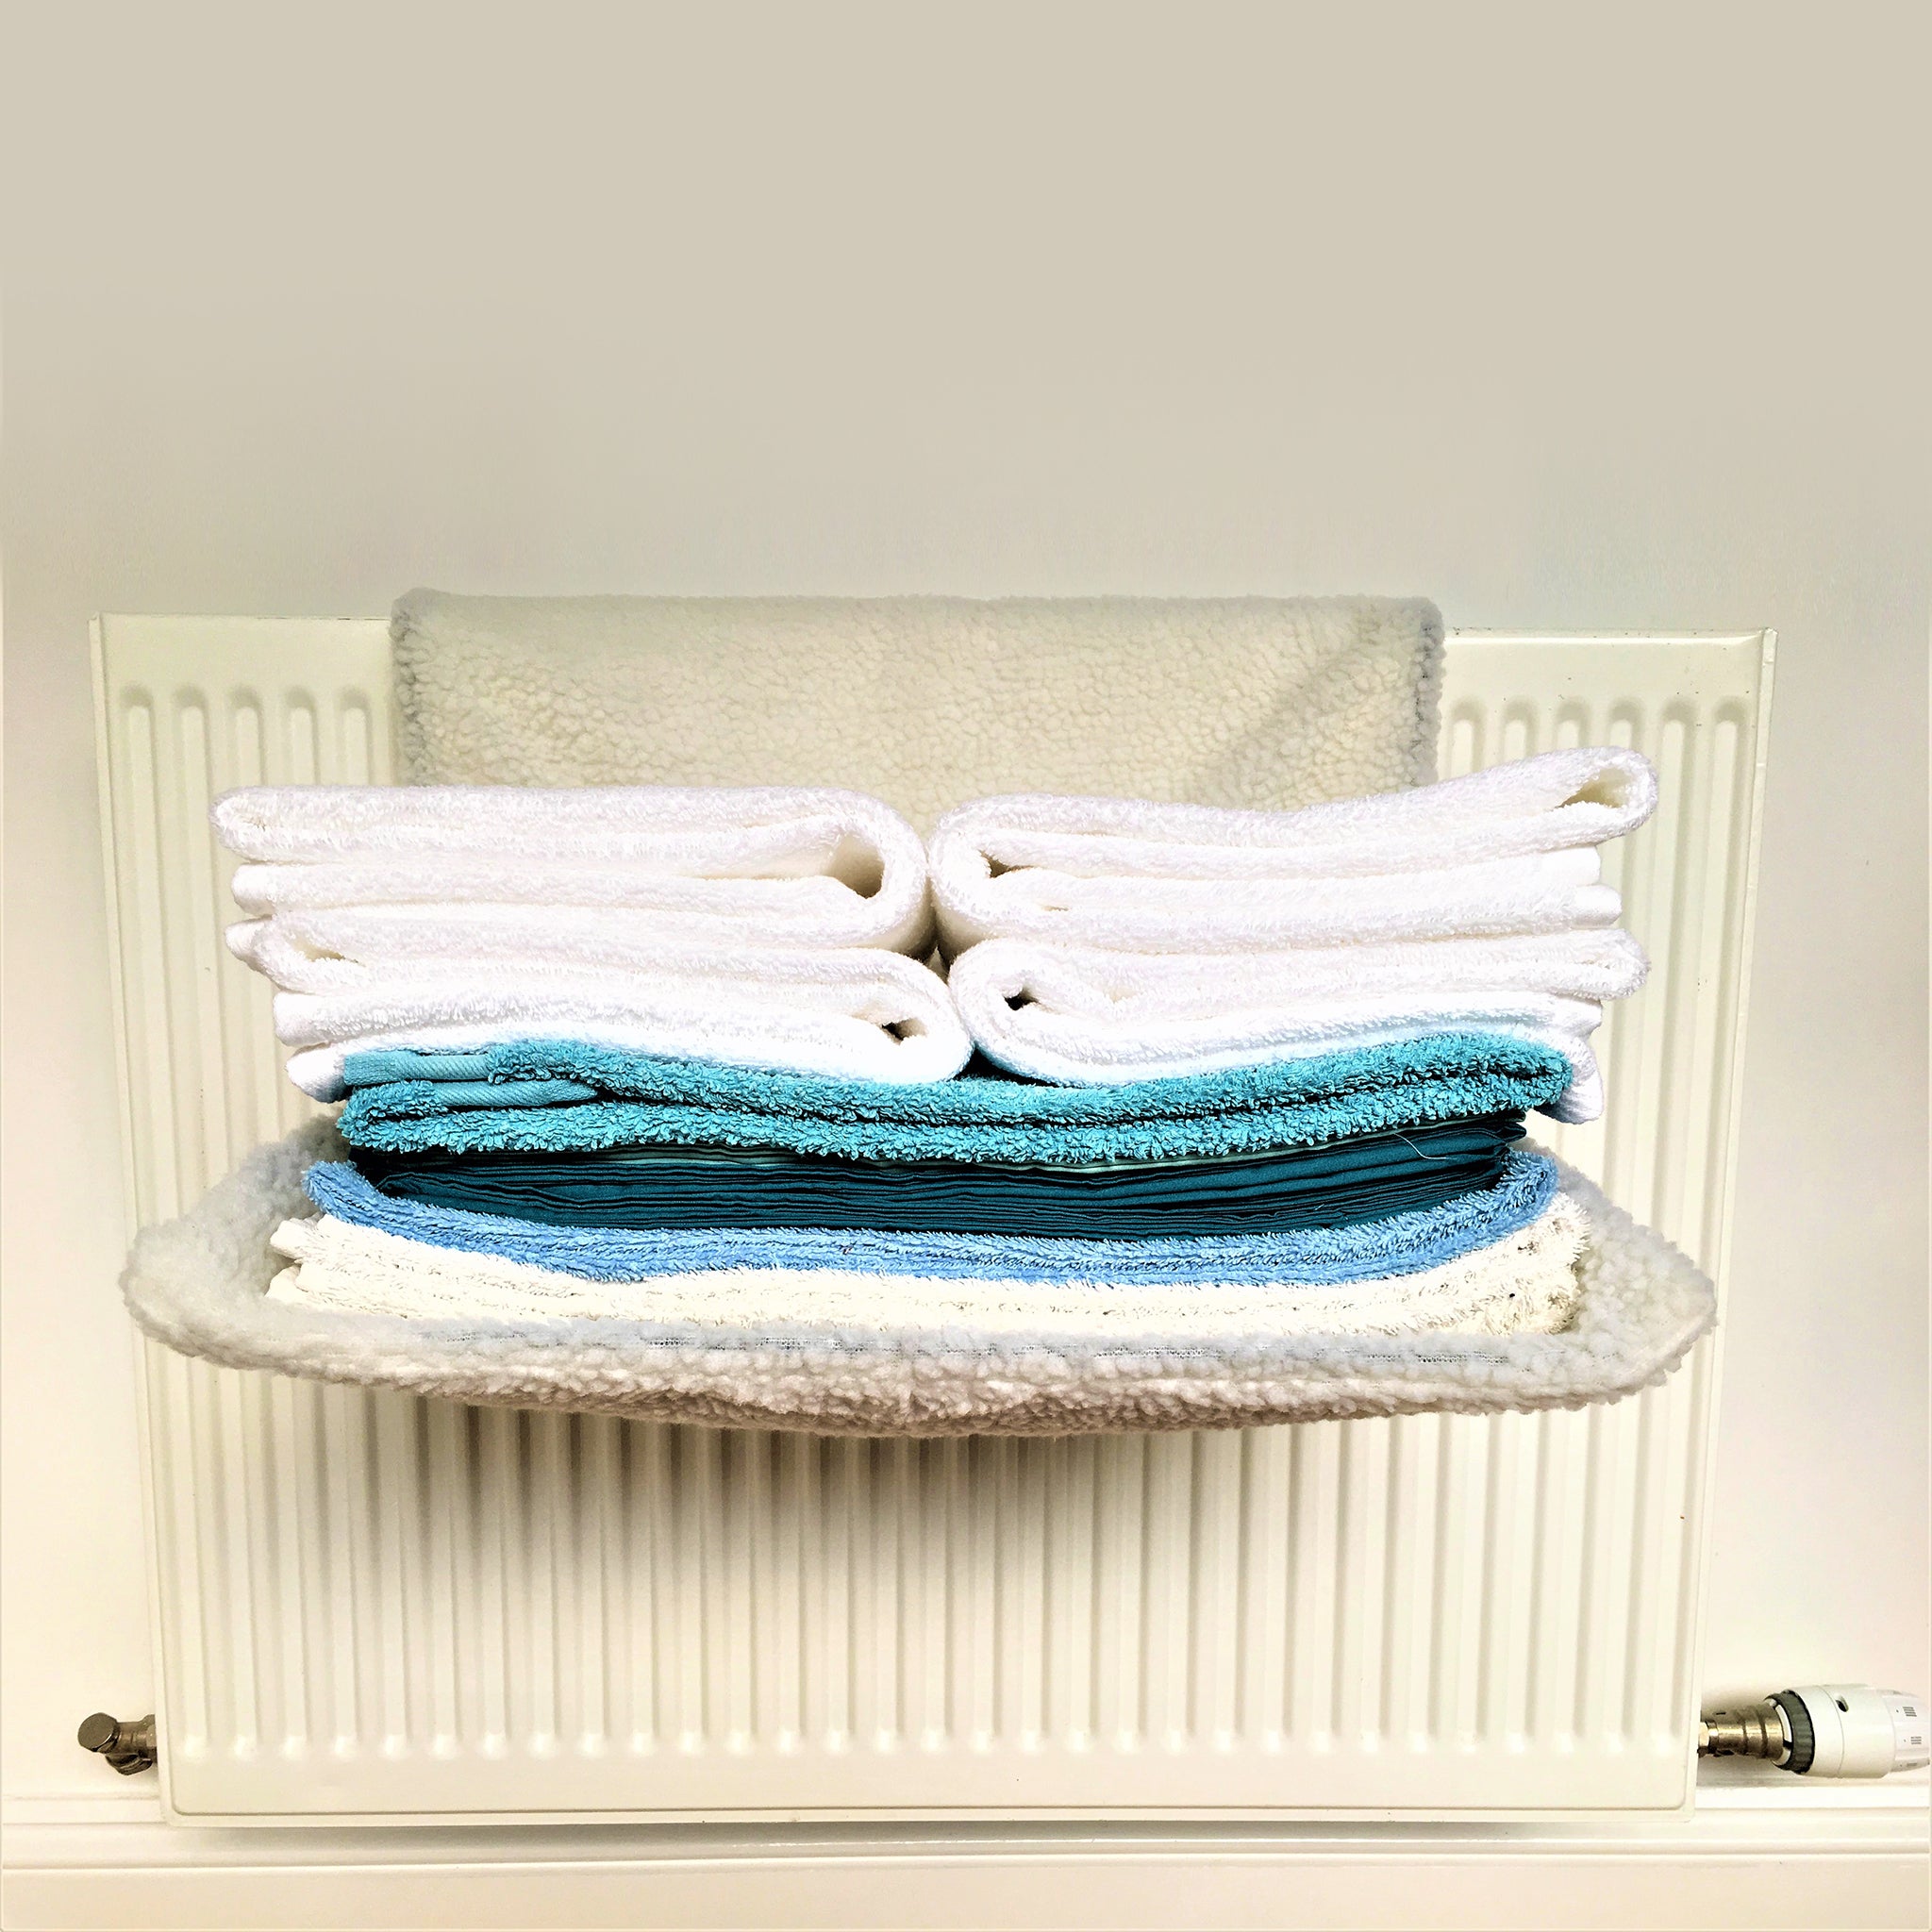 radiator airer for almost but not quite dry laundry